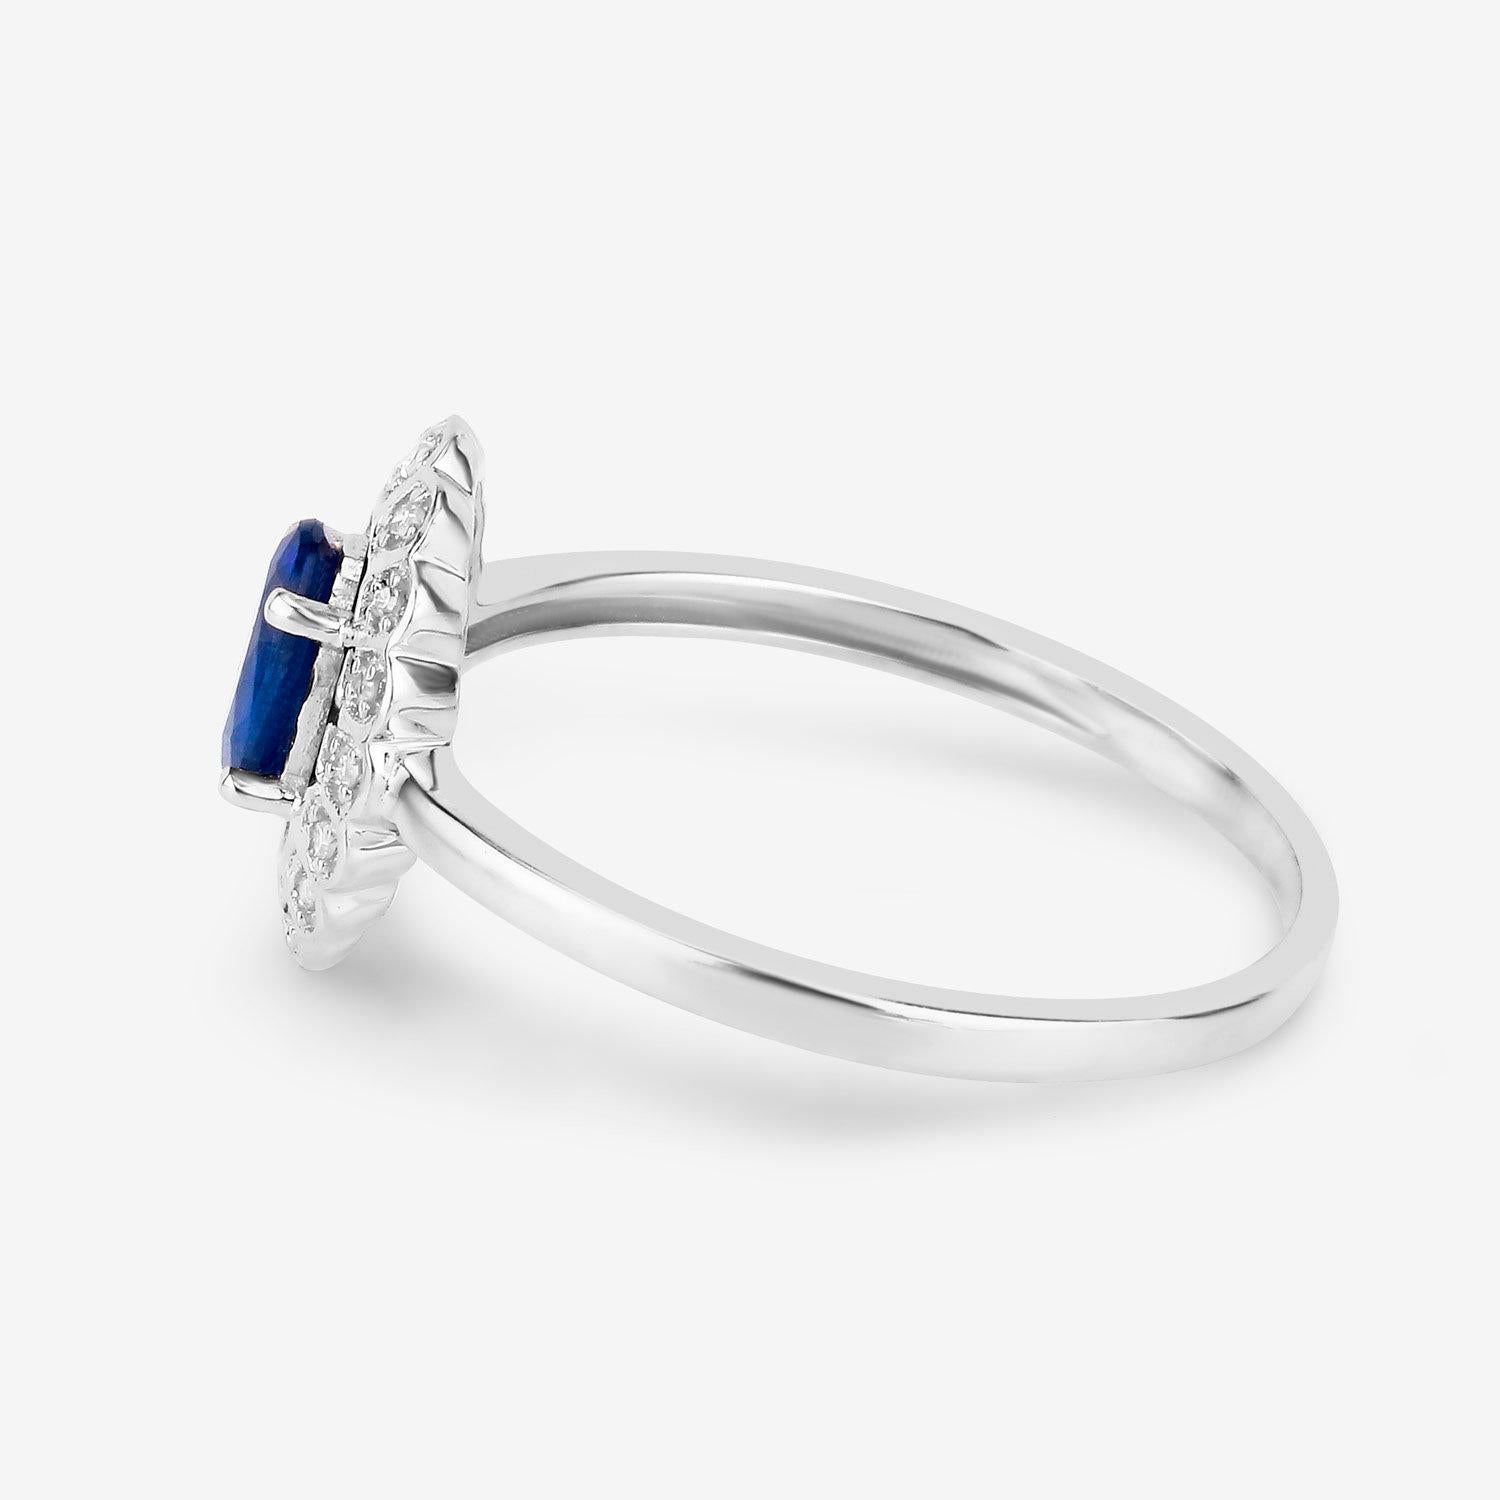 Blue Sapphire Ring With Diamonds 14K White Gold In Excellent Condition For Sale In Laguna Niguel, CA